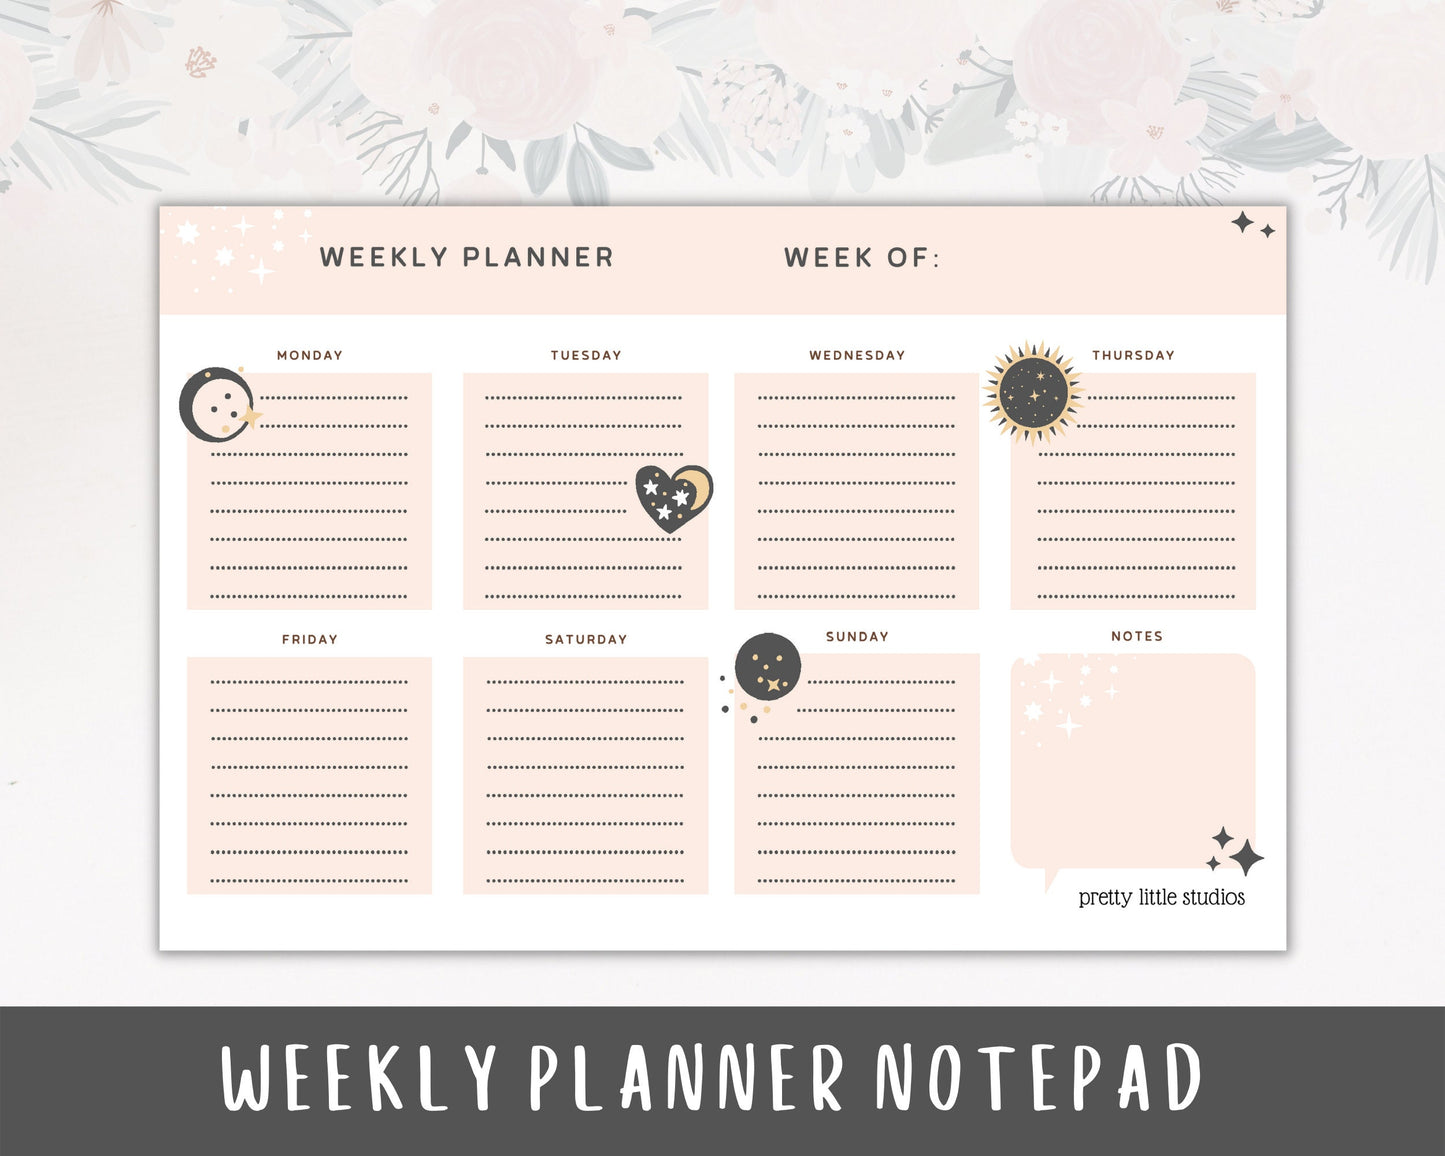 Weekly Planner Notepad - Notepad Planner - Office Planner - Weekly Planner